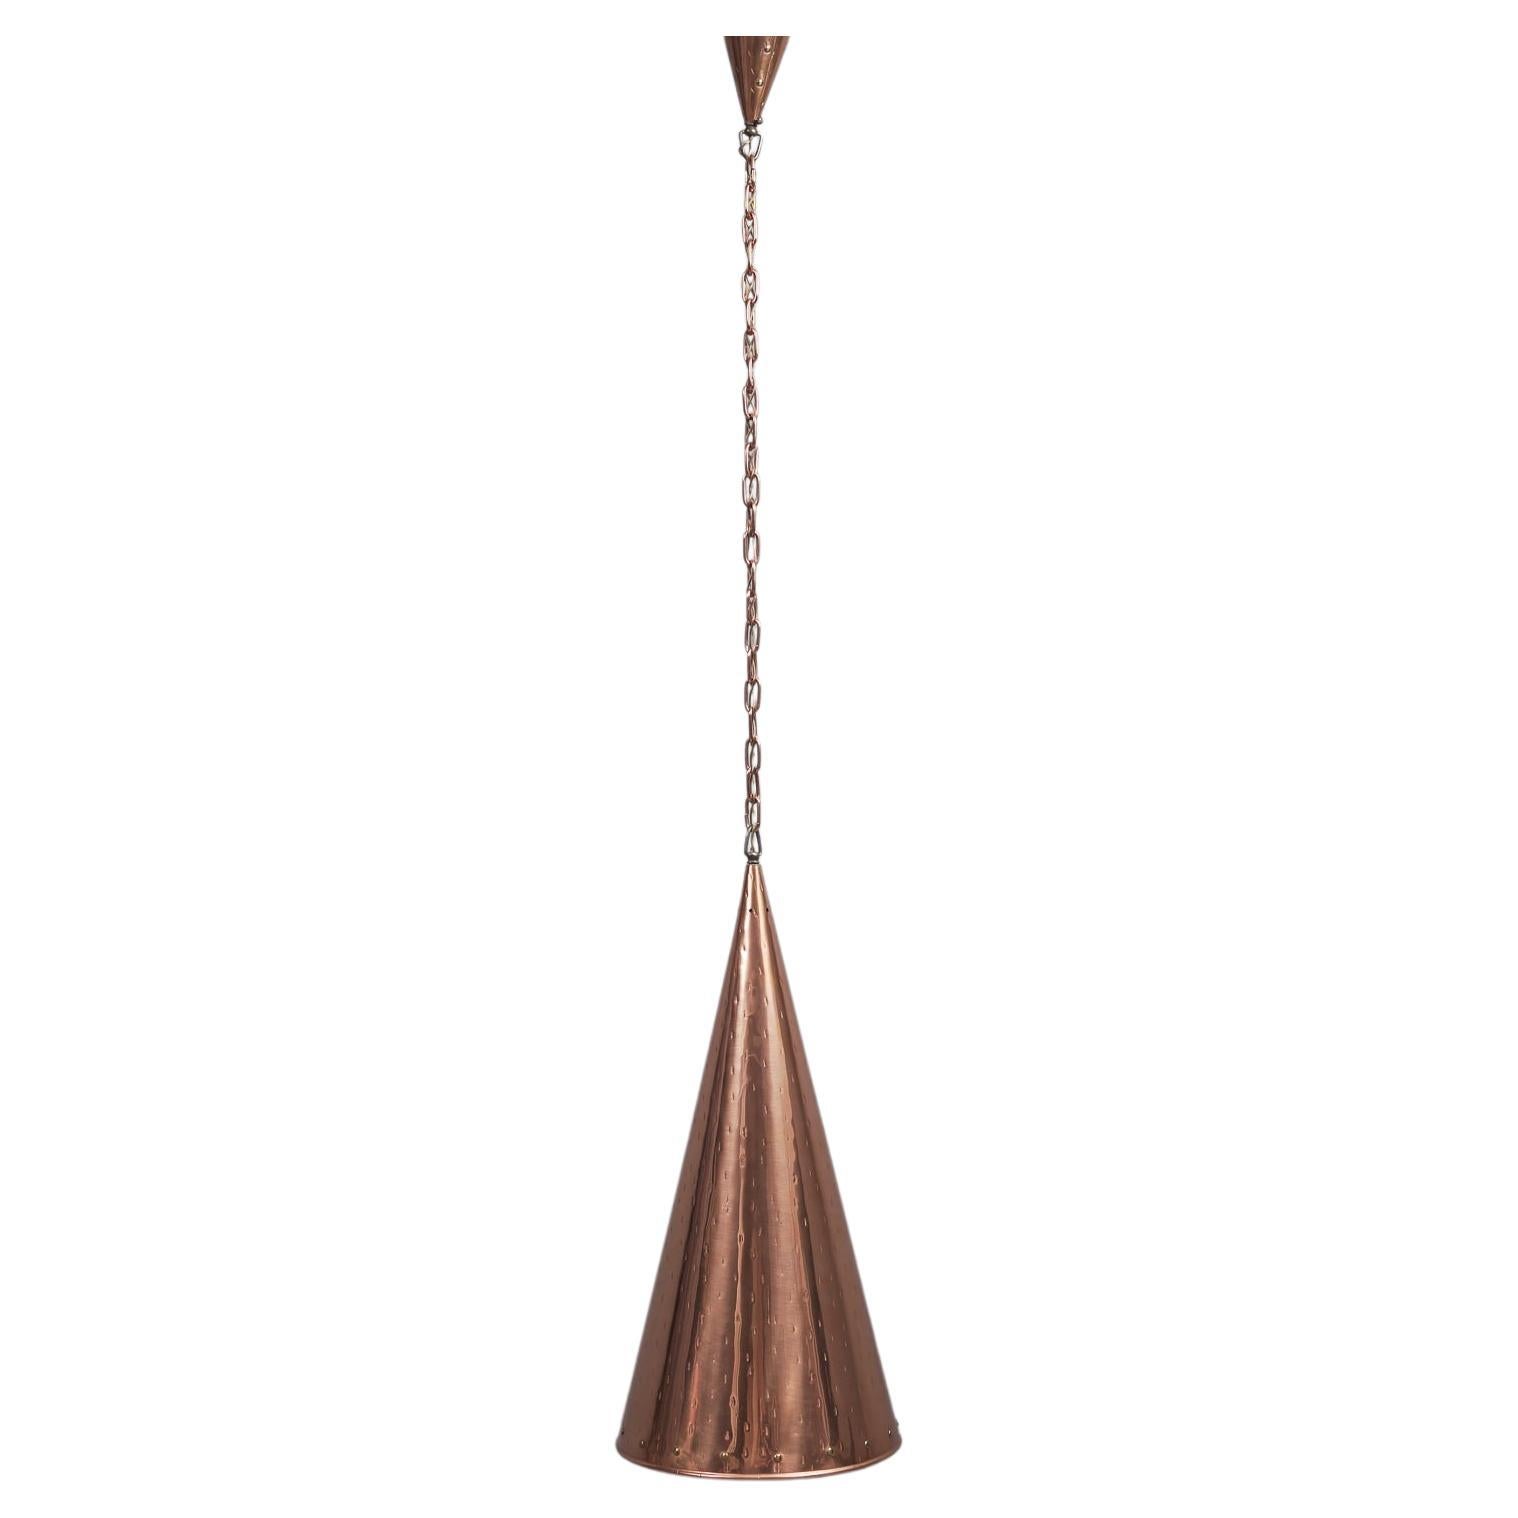 Hammered Copper Cone Pendant Lamps by E.S Horn Aalestrup, 1950s Denmark